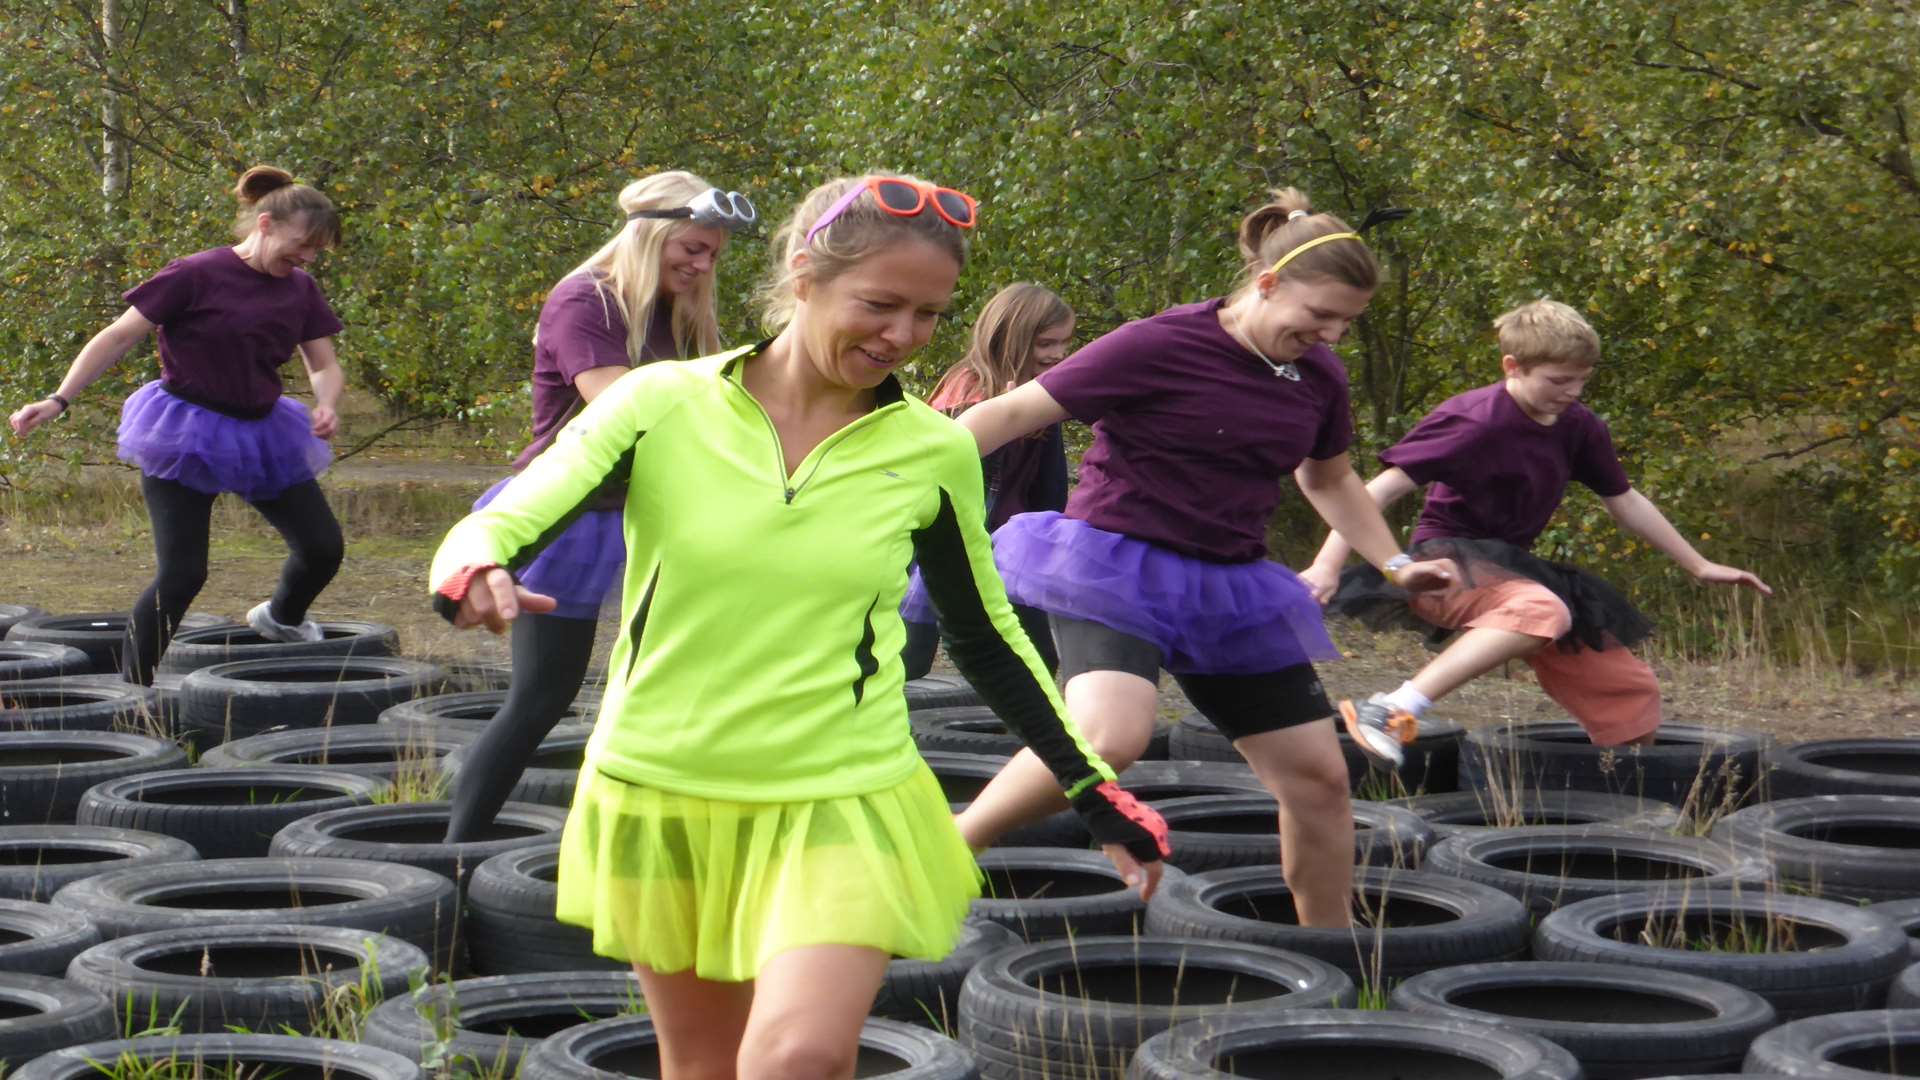 Participants conquer the tyre walk at the KM Assault Course Challenge. Booking is now open for the 2016 event staged at Betteshanger Park, Nr Deal on Saturday, October 1.